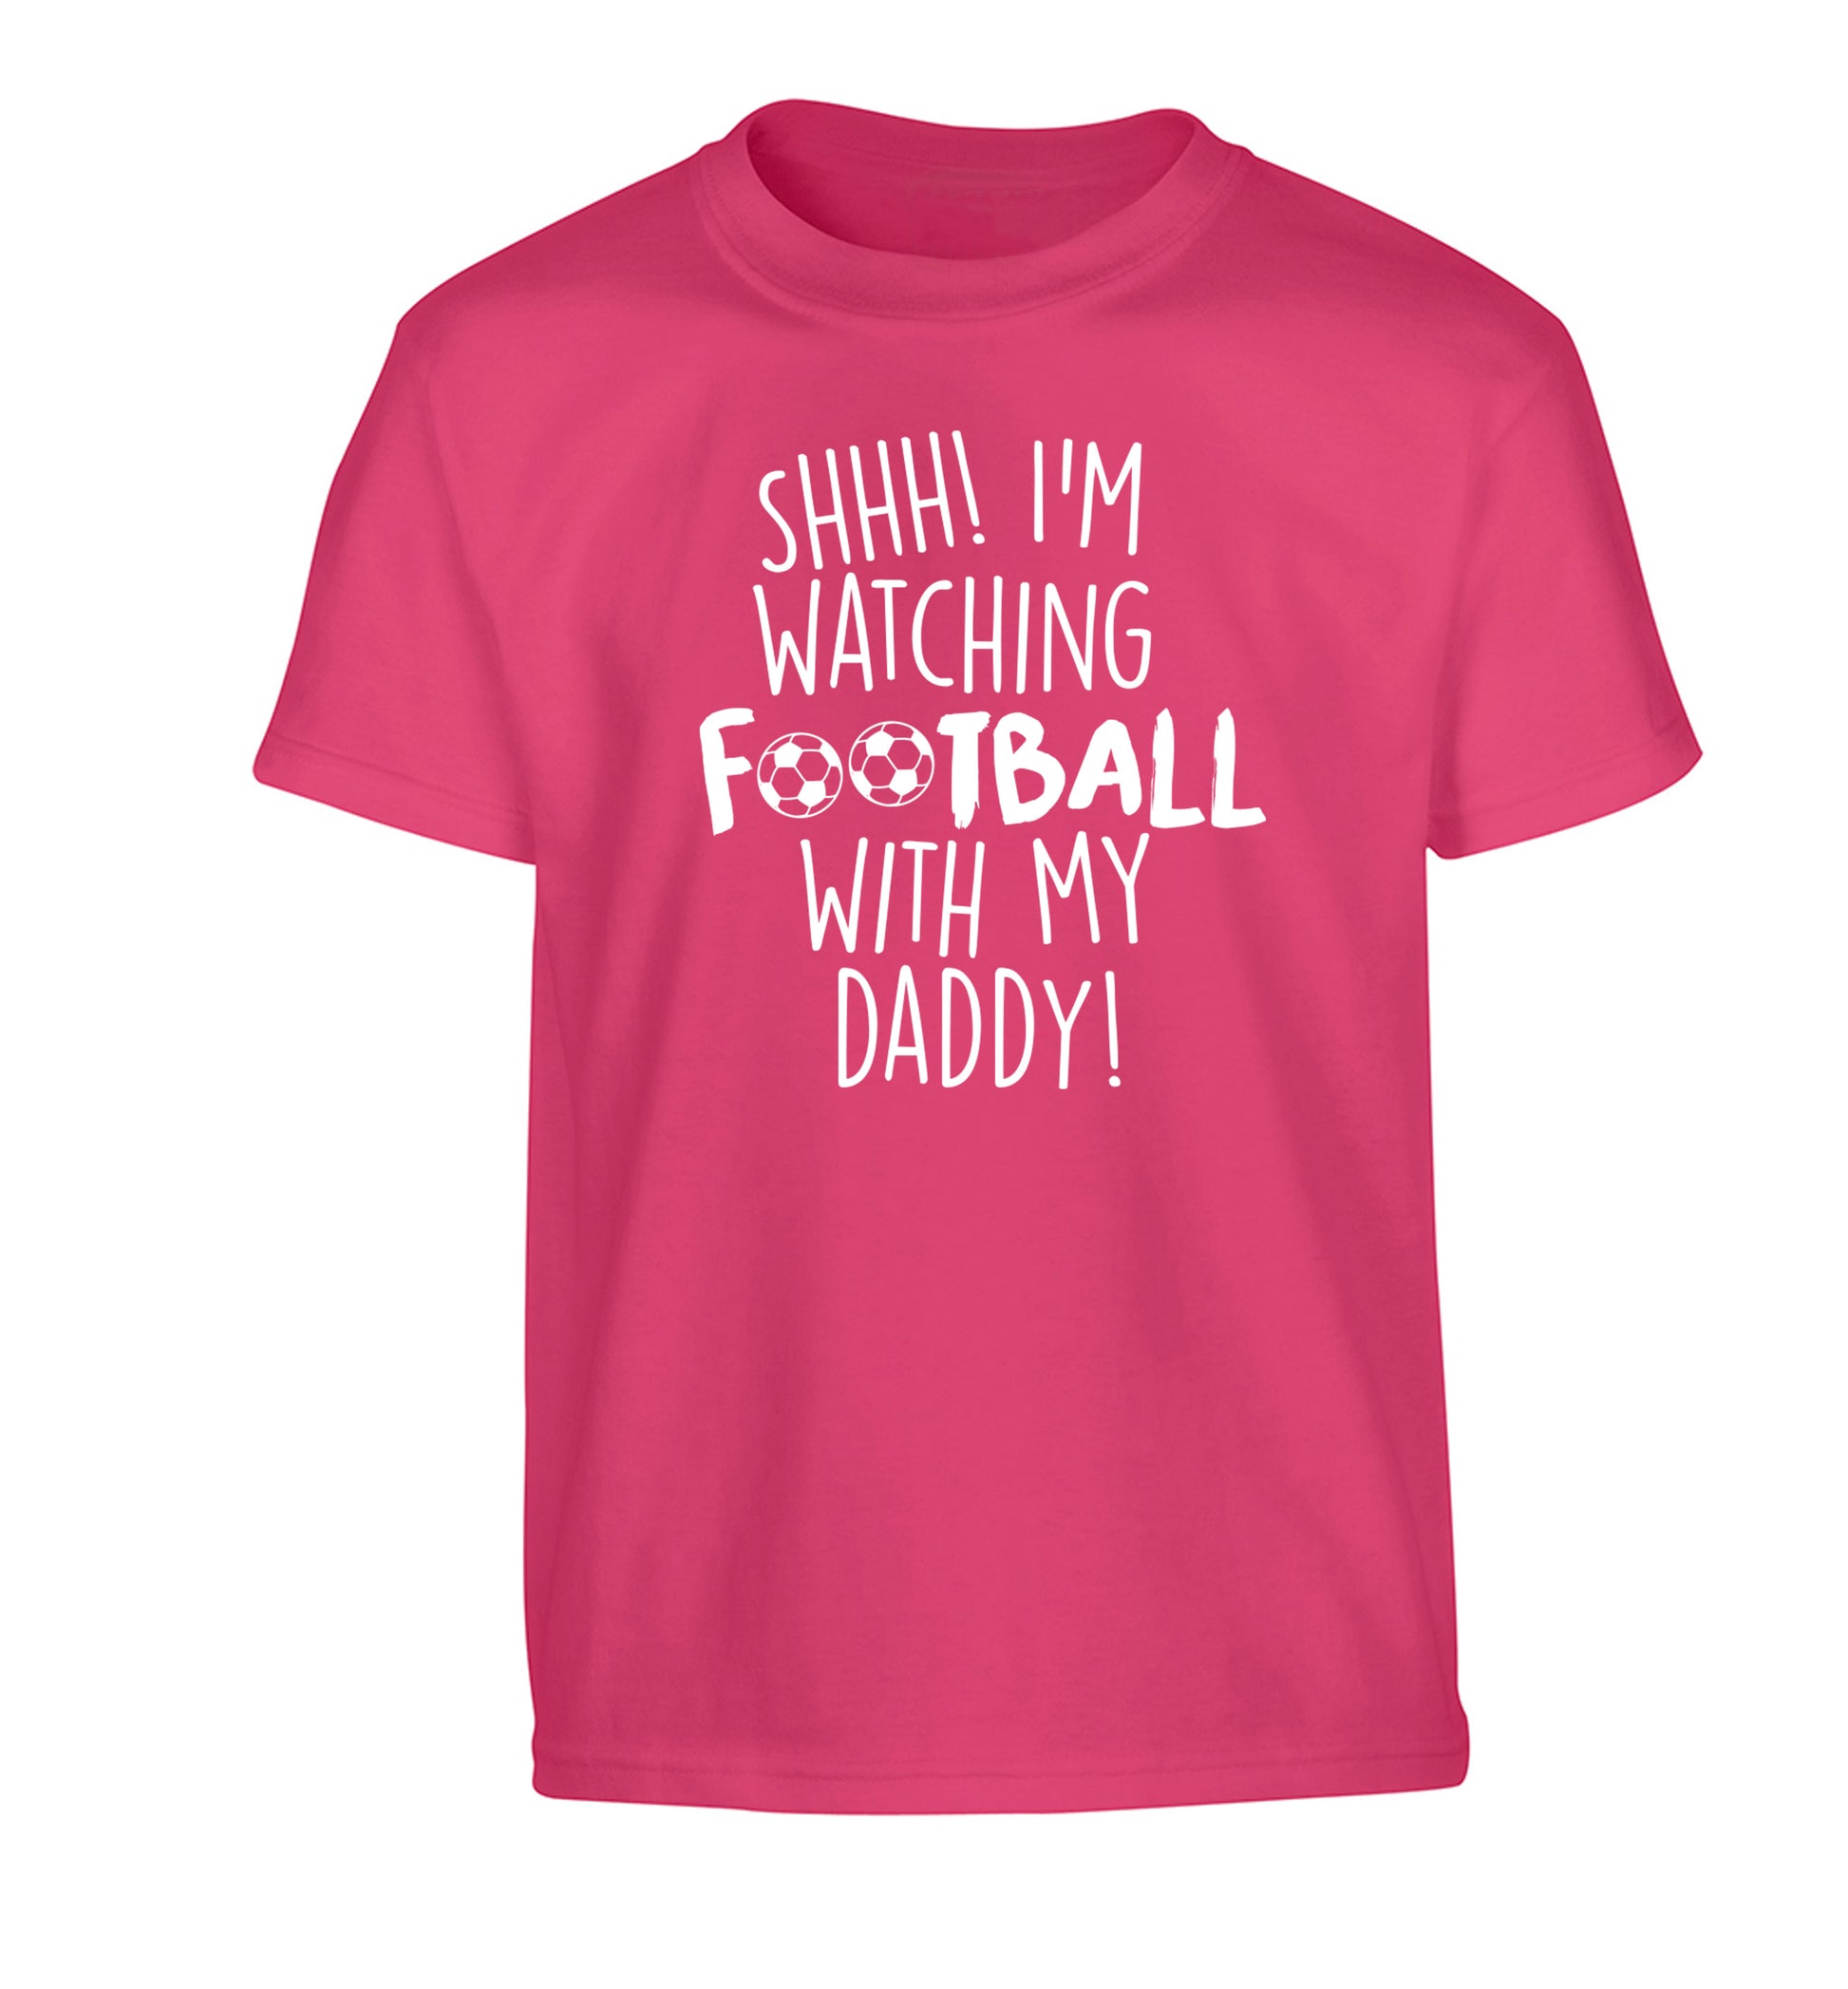 Shhh I'm watching football with my daddy Children's pink Tshirt 12-14 Years